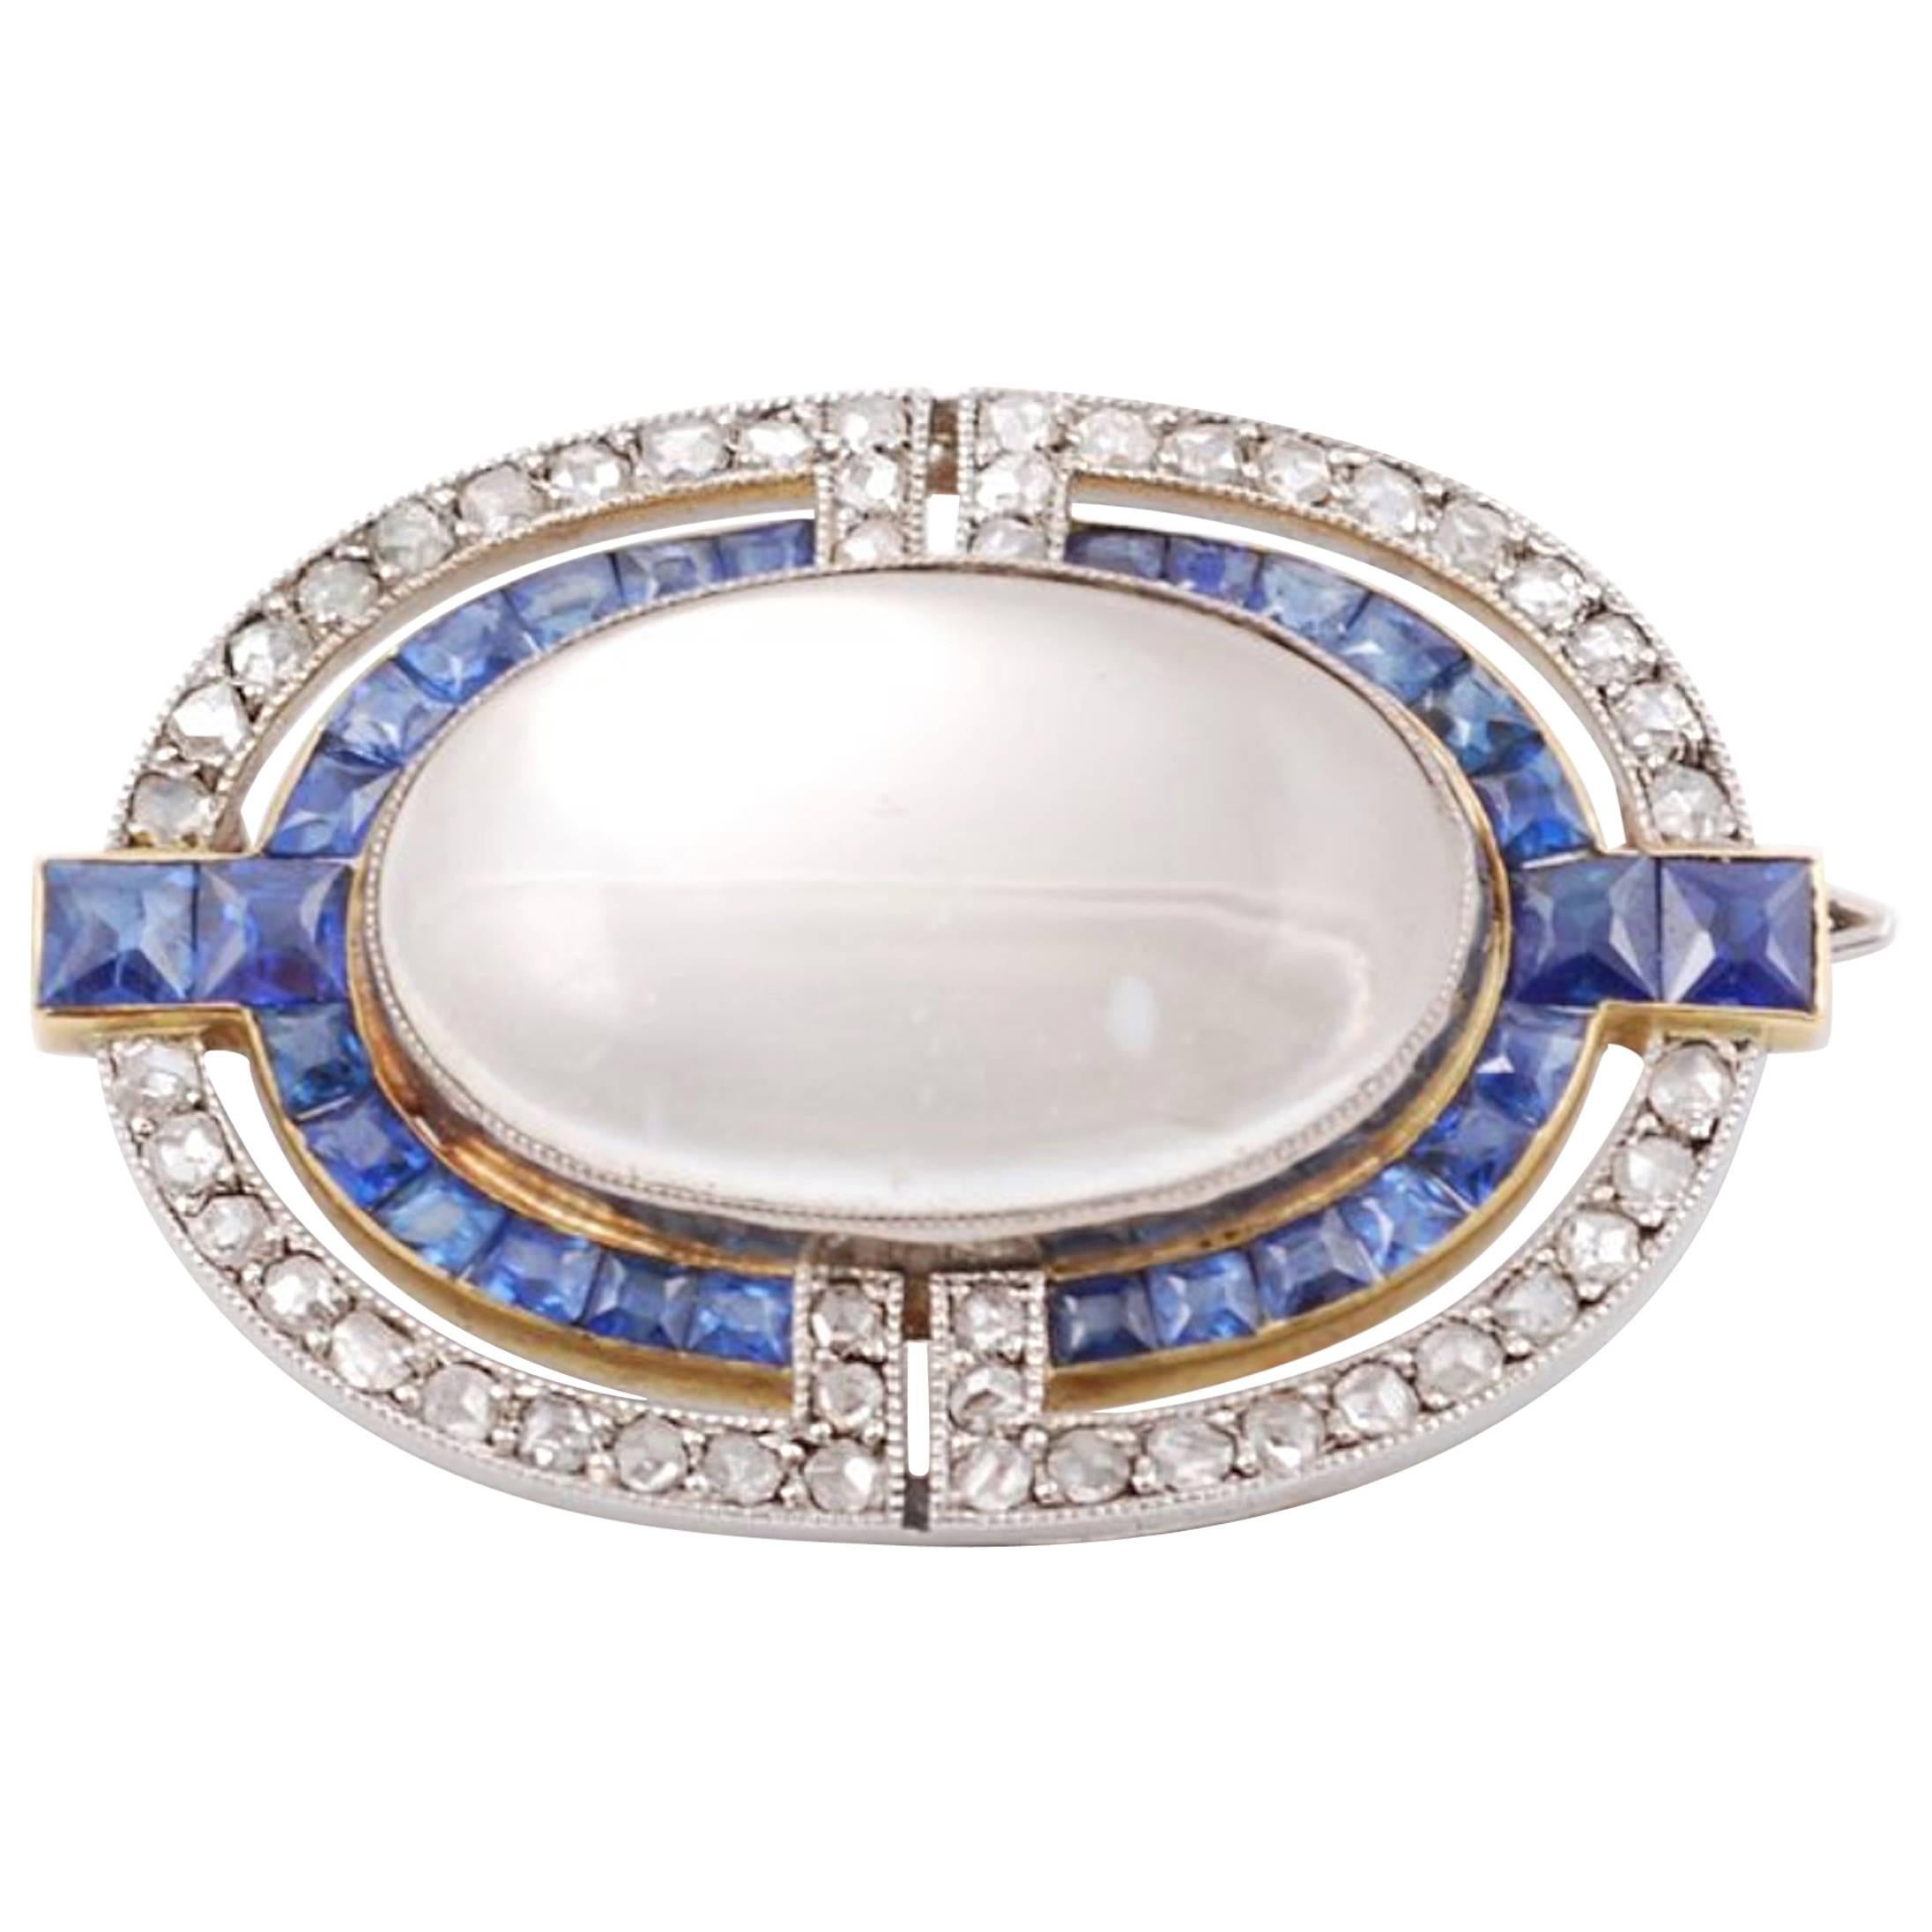 Cartier Paris, Art Deco Brooch convertible in Necklace (chain and platinum element including) in platinum 850, 18k gold 750, rose cut diamond, calibrated sapphire and centered by a cabochon Moonstone, circa 1915
Signed Cartier Paris, numbered,